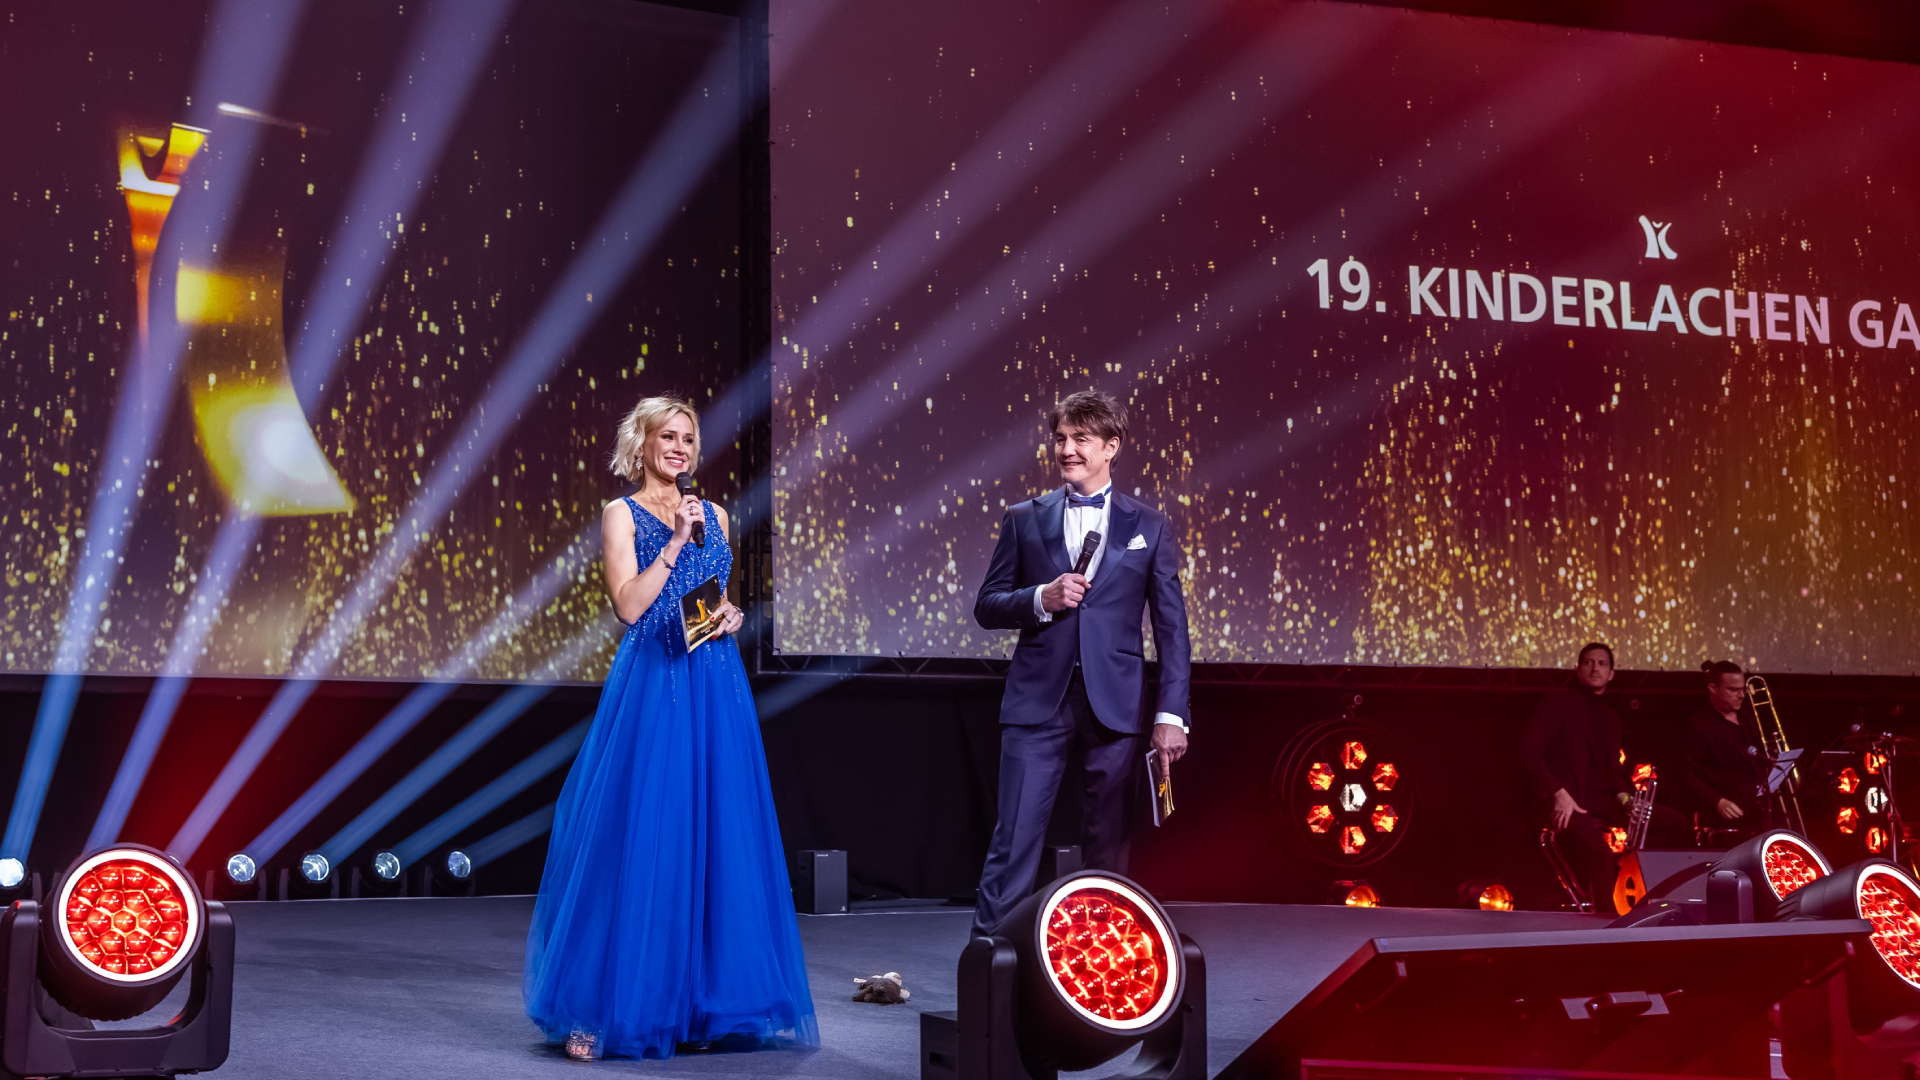 Kinderlachen Gala Shines with the PROLIGHTS Astra Series
